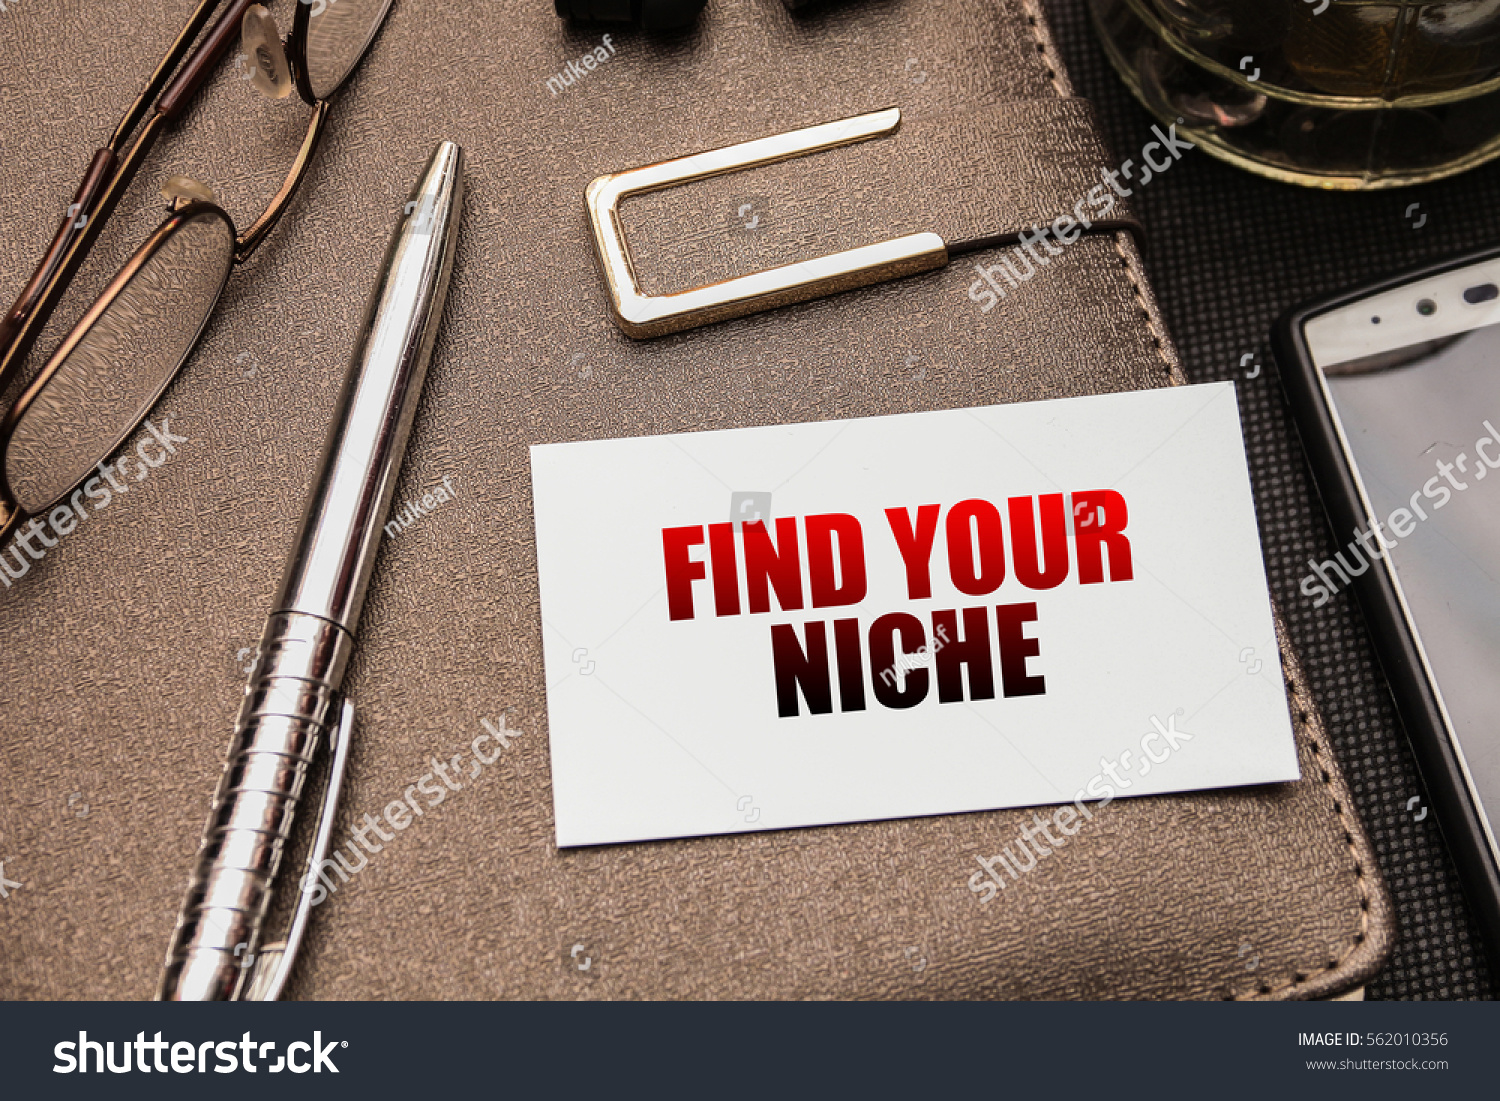 realistic business concept image. find your niche